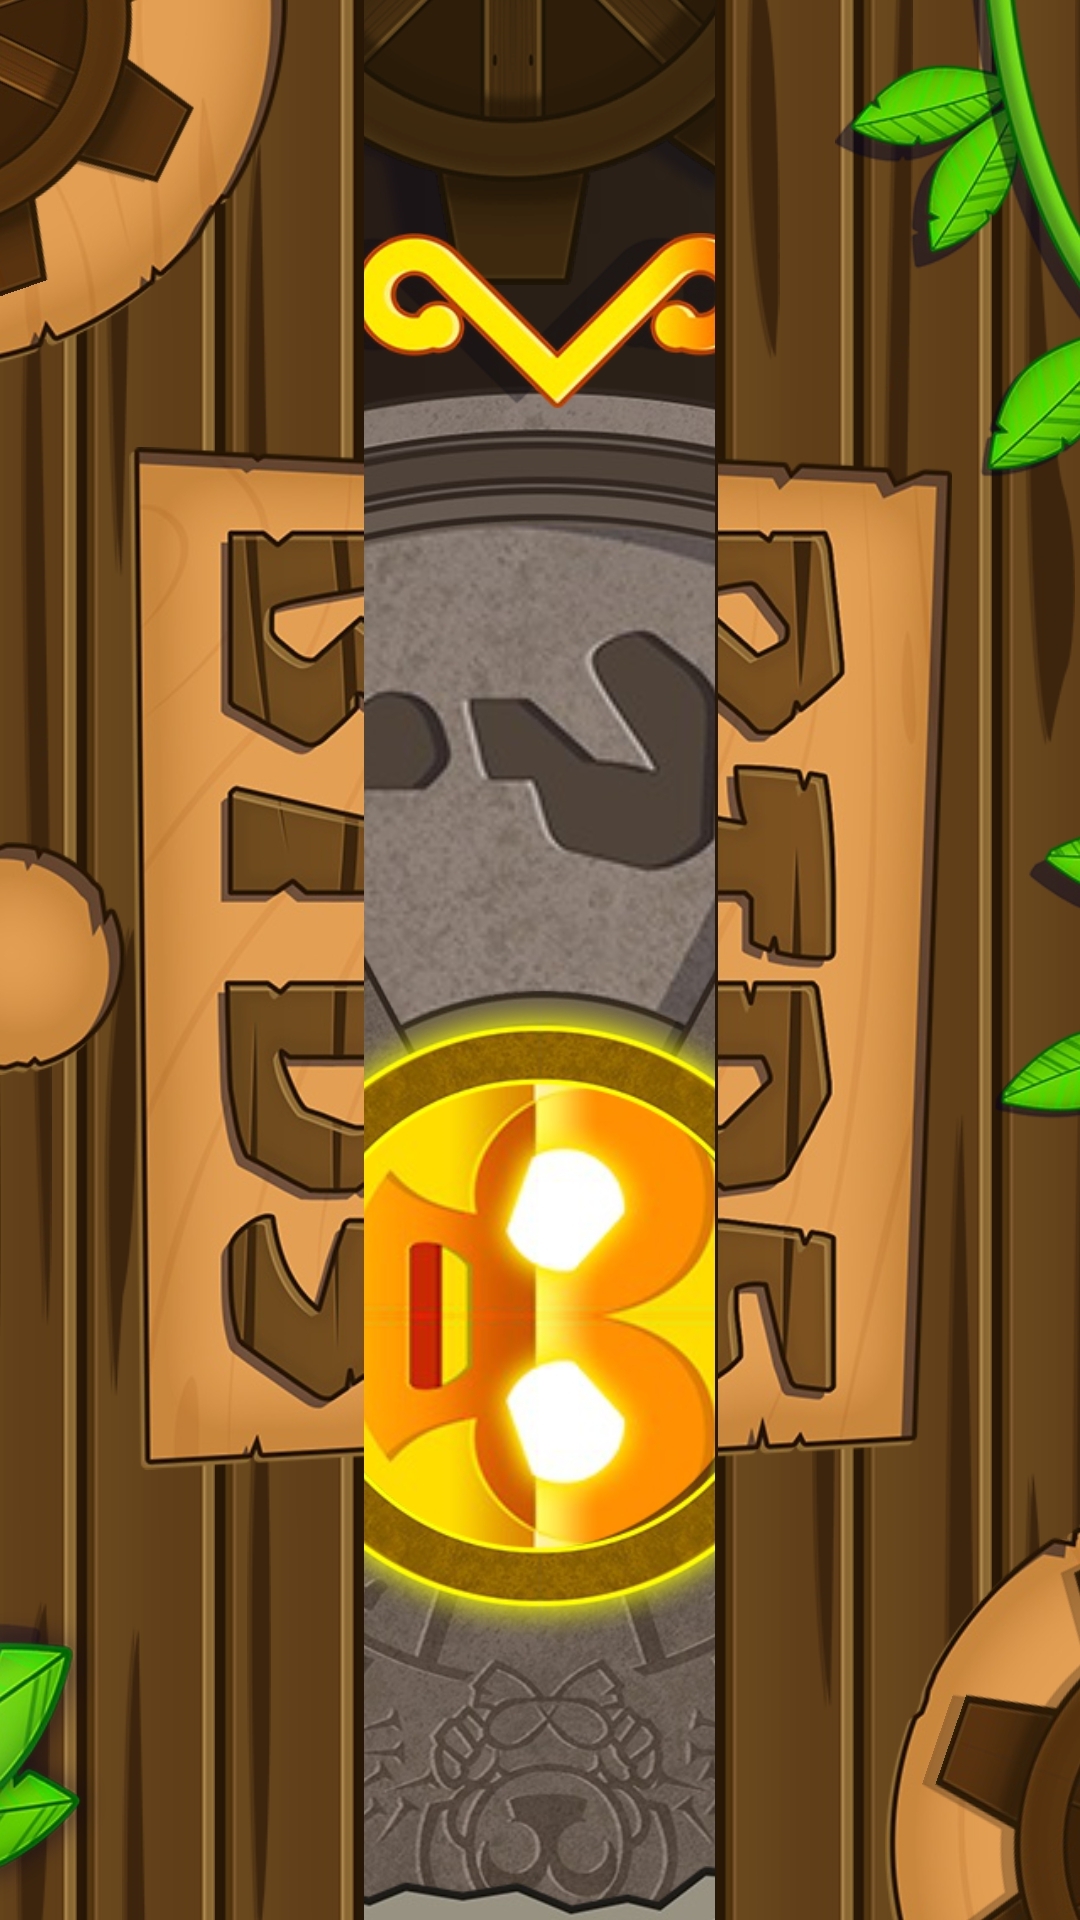 Bloons TD 5(Large currency)